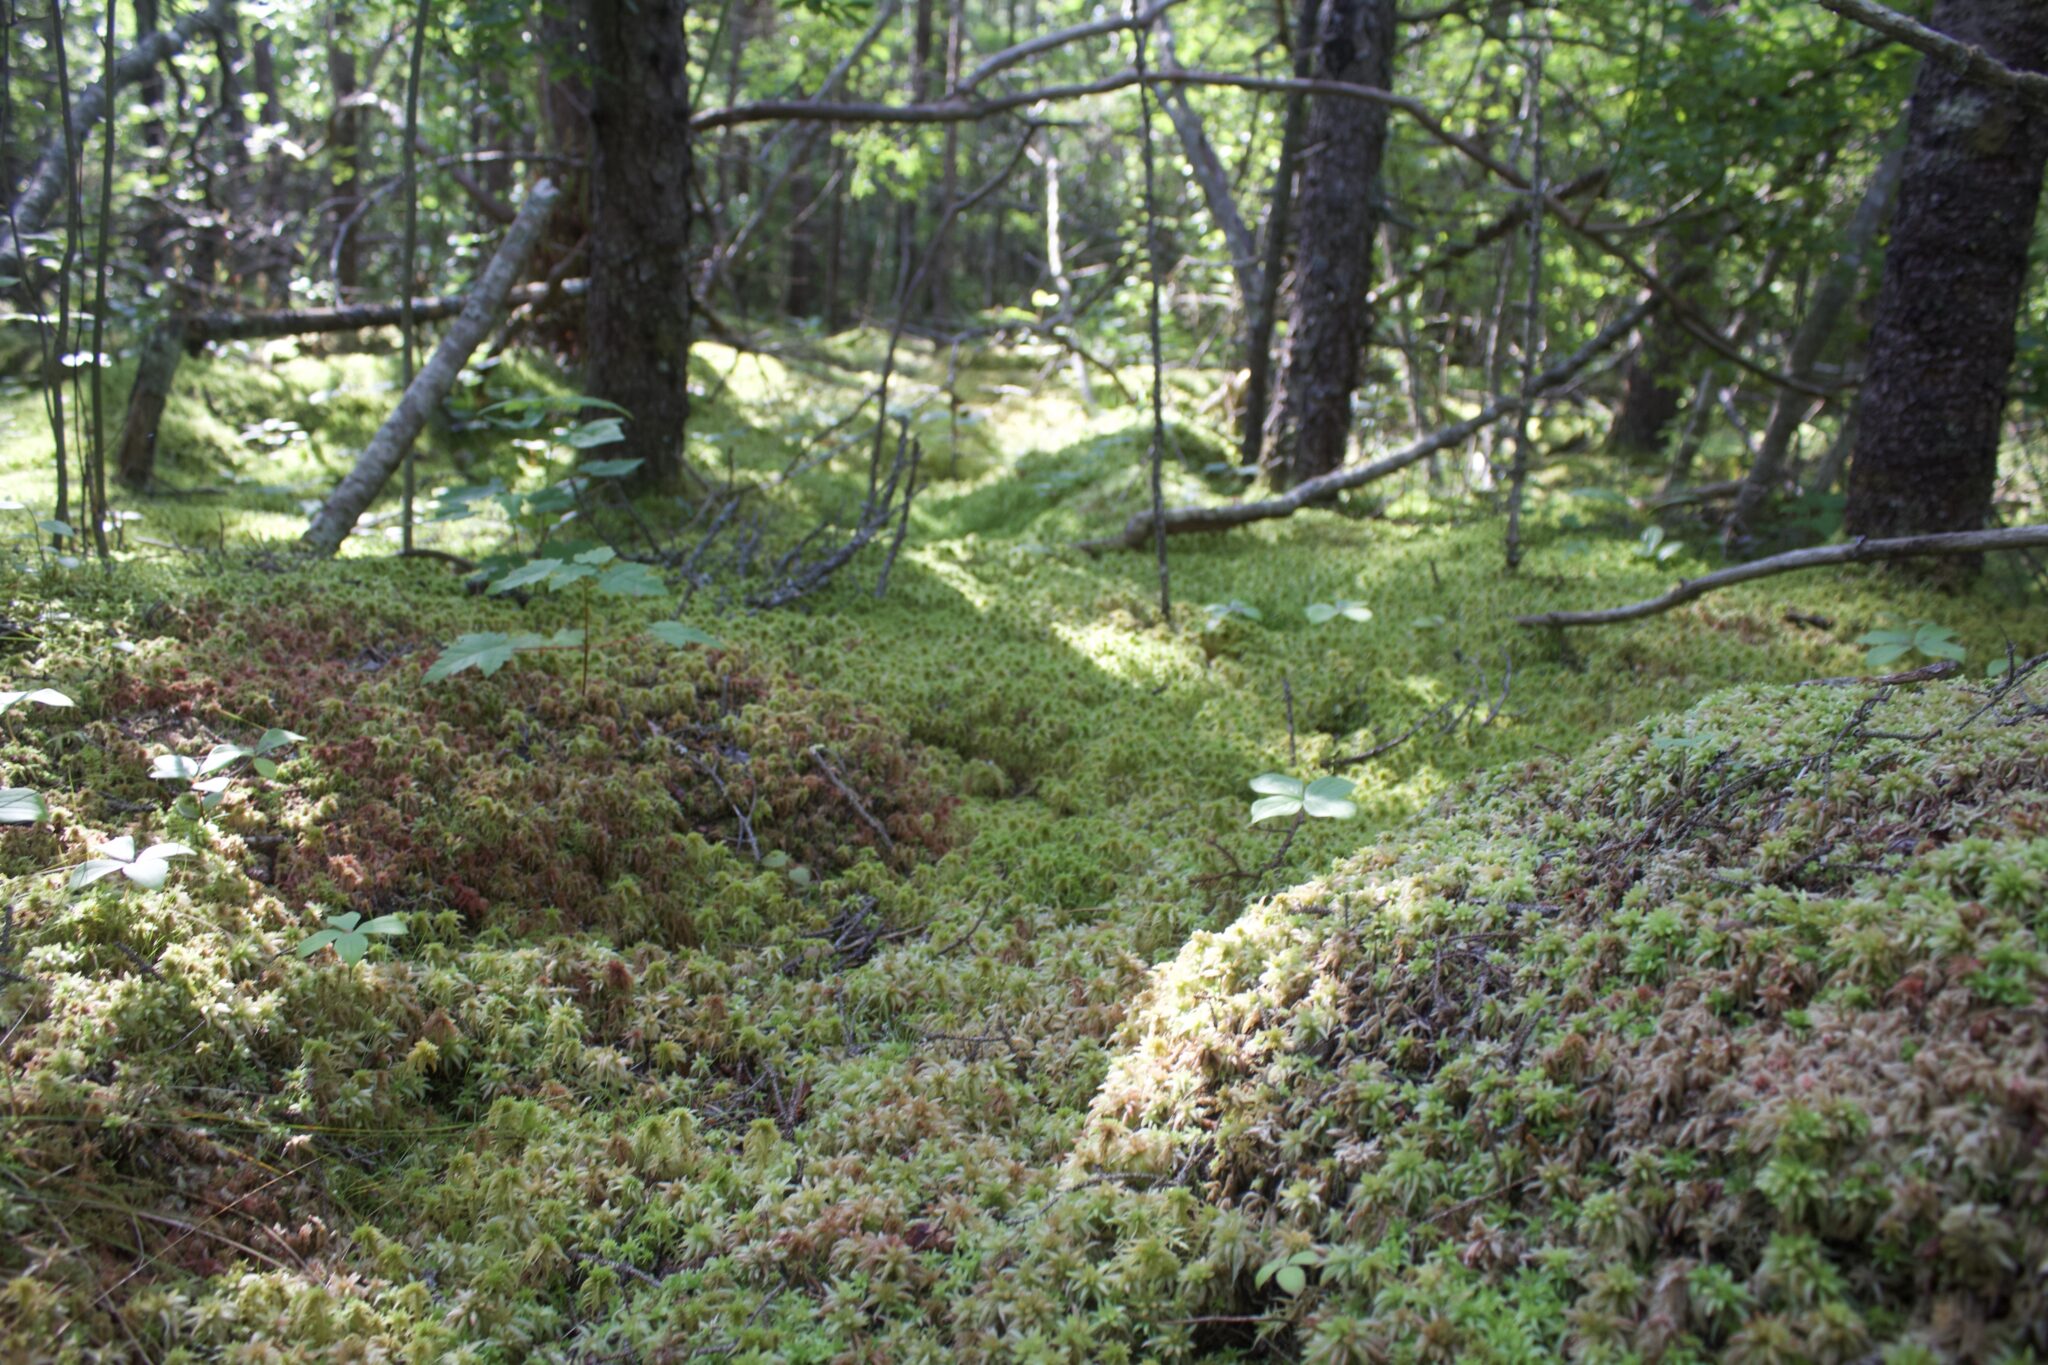 A forest clearing is partially lit by the sun. Moss and a few small plants cover the ground.